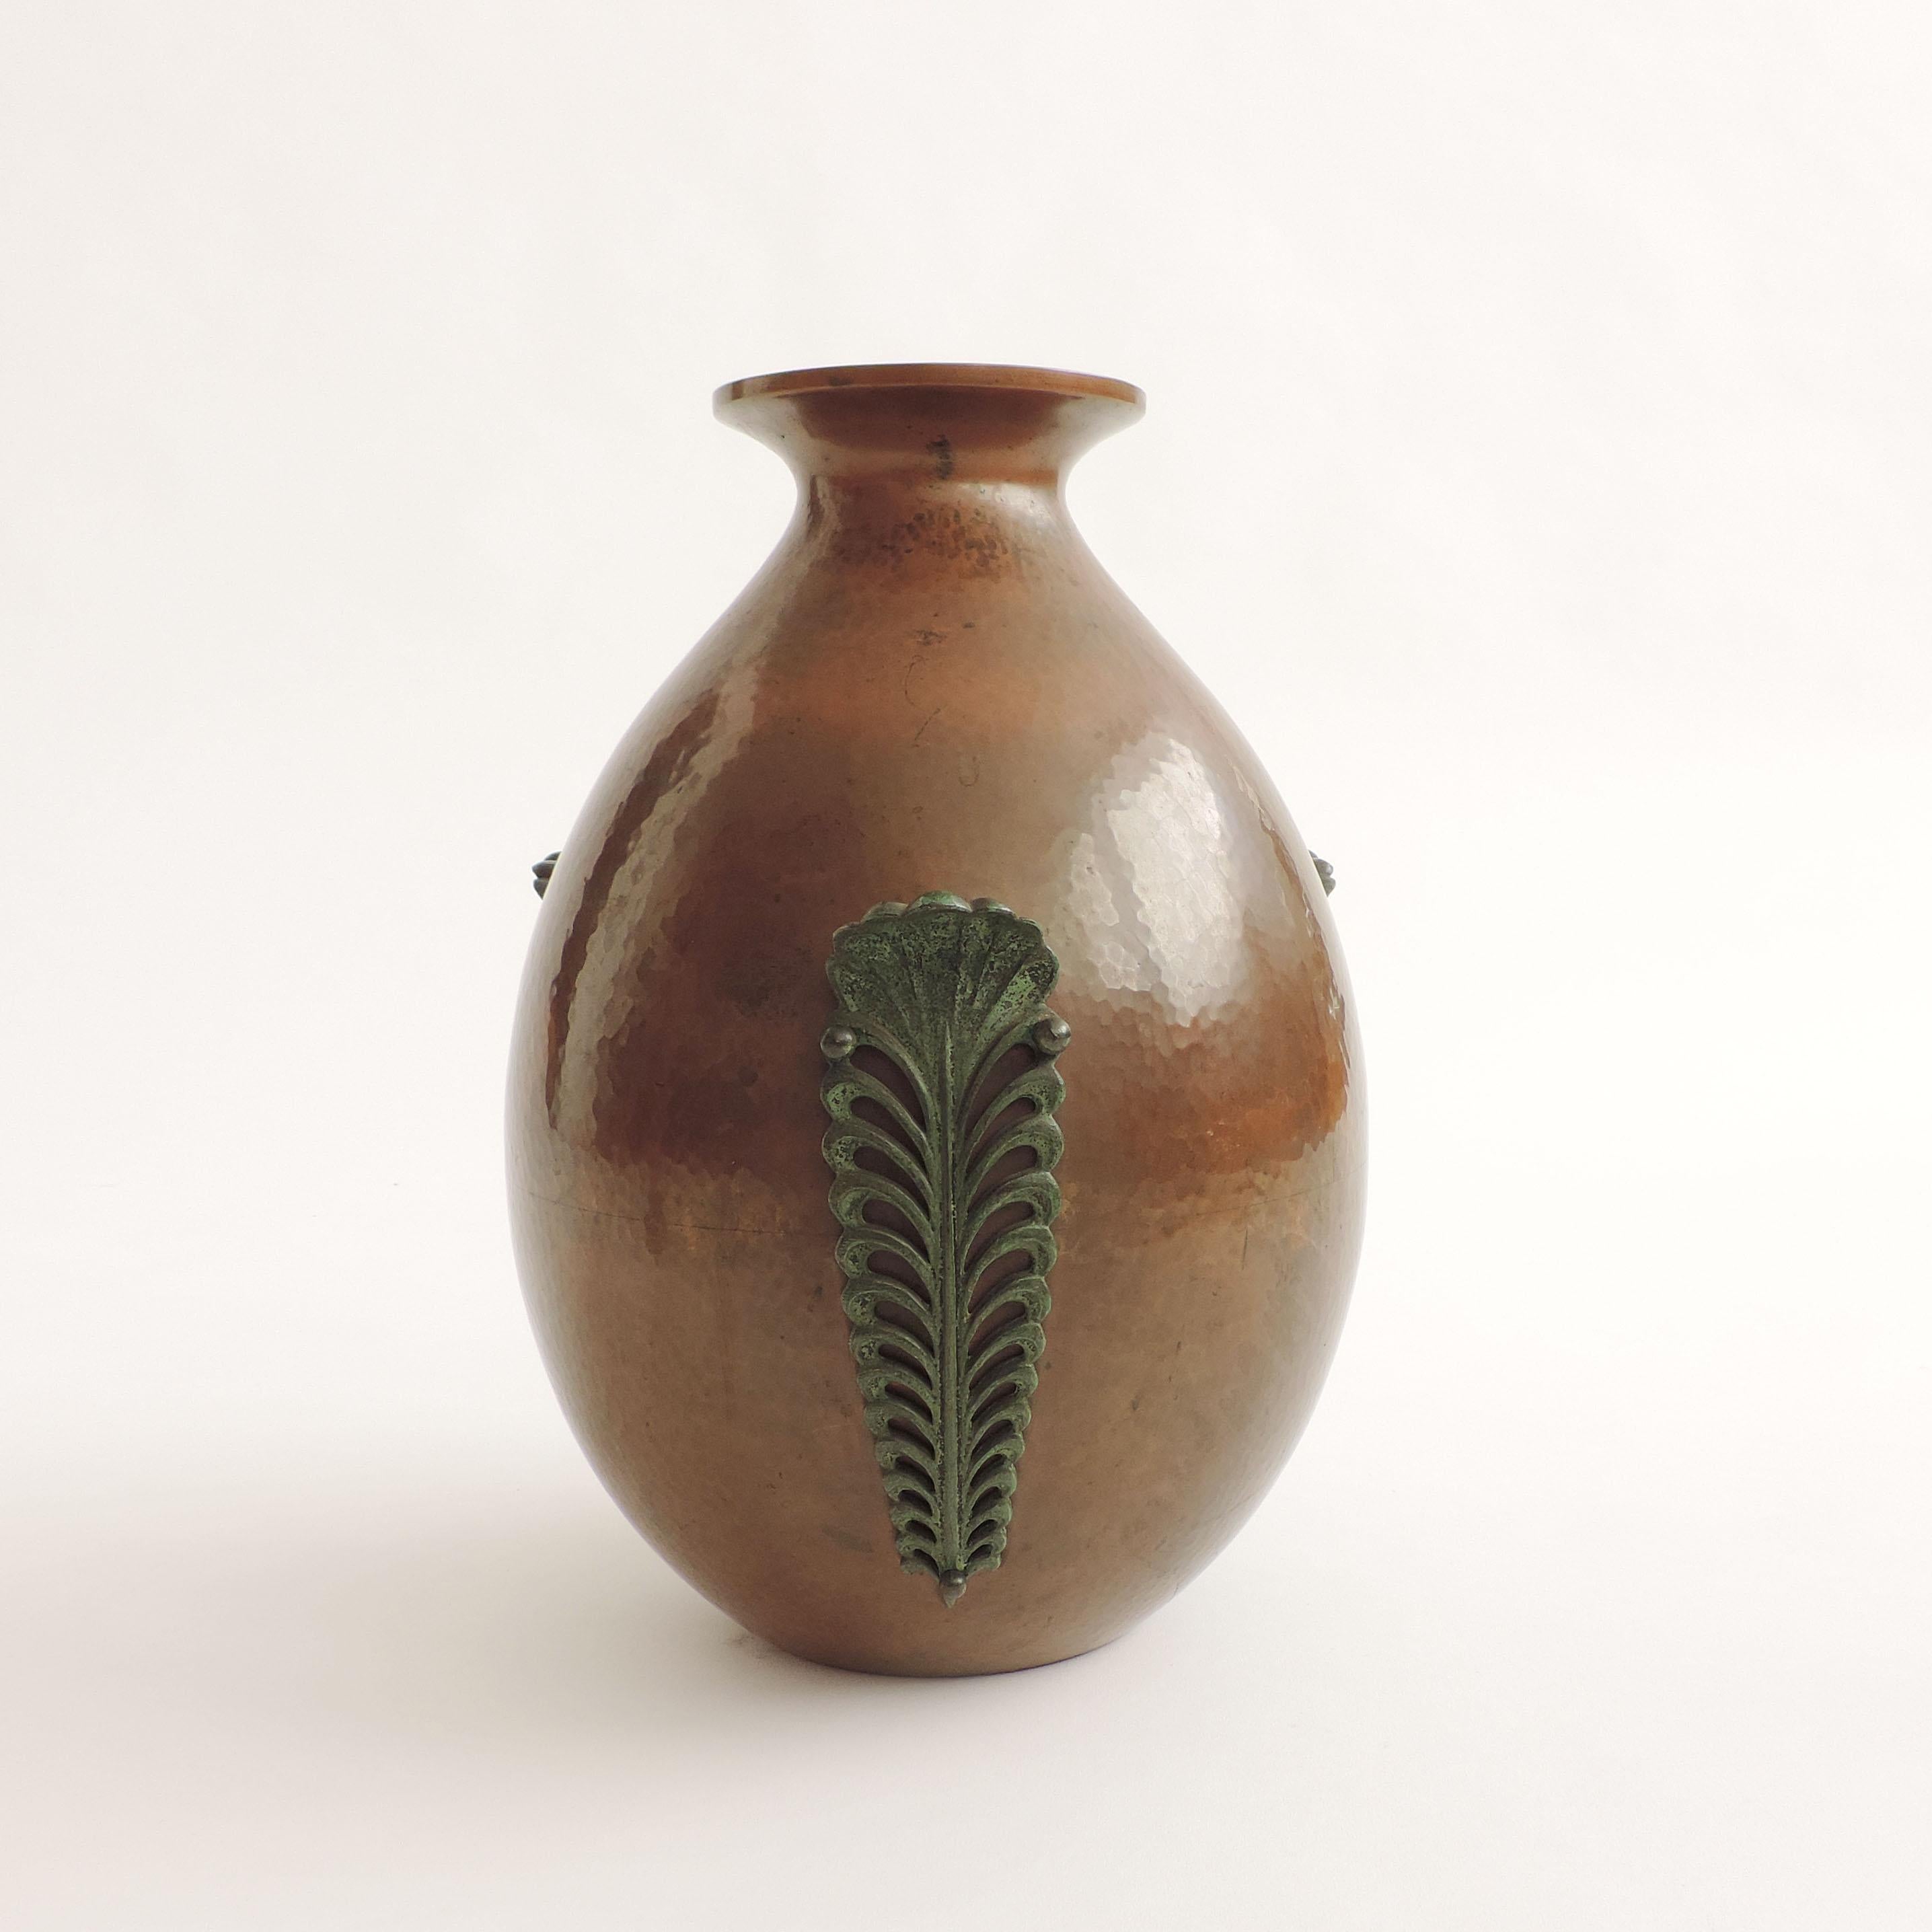 Italian 1930s Hammered Copper Vase.
Three metal decorative leaves are applied with three round metal buttons.
Unsigned piece.
 